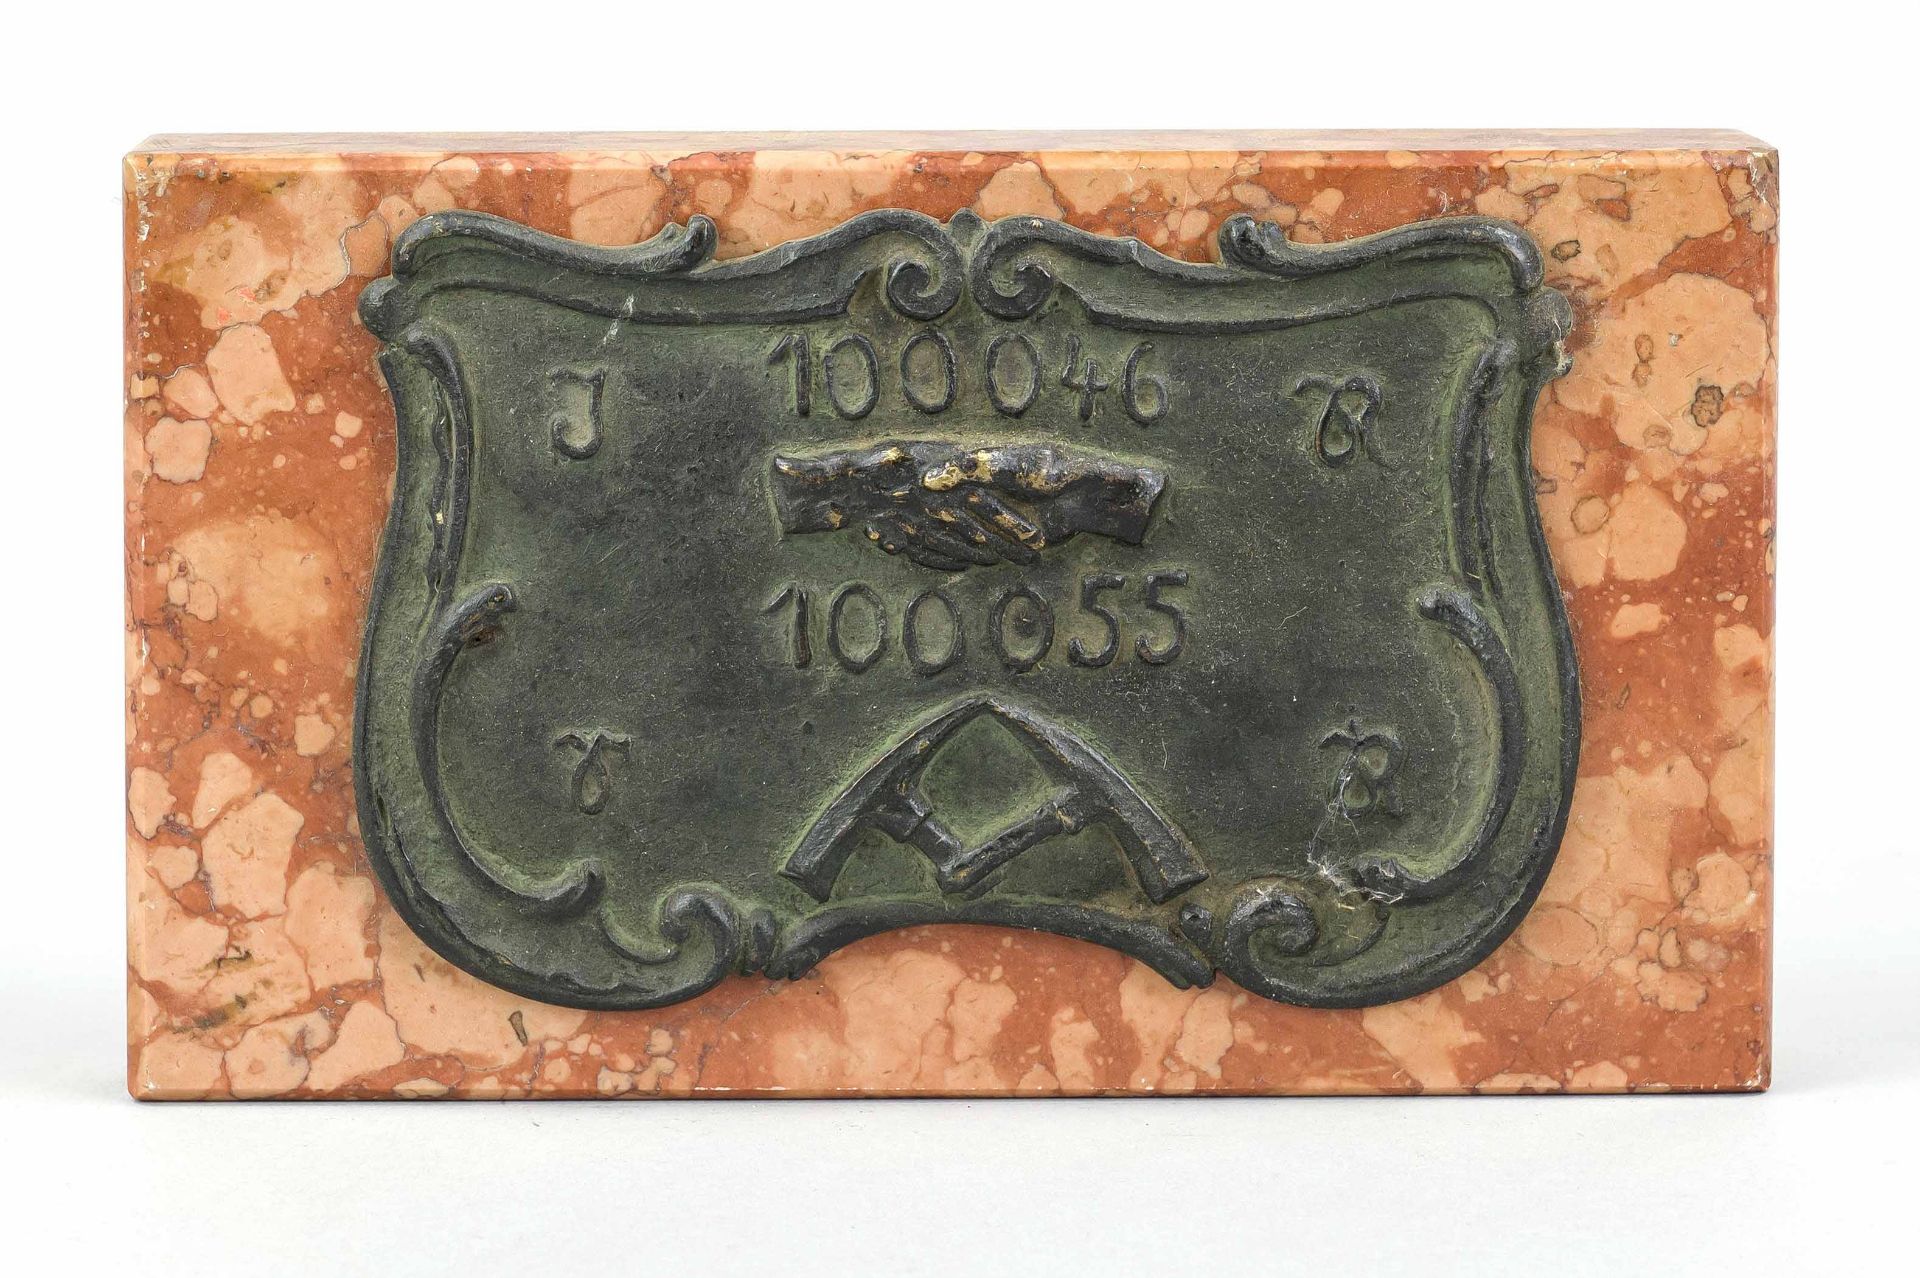 Mining plaque, 1st half 20th century, patinated bronze cartouche with crossed pickaxes, hands and